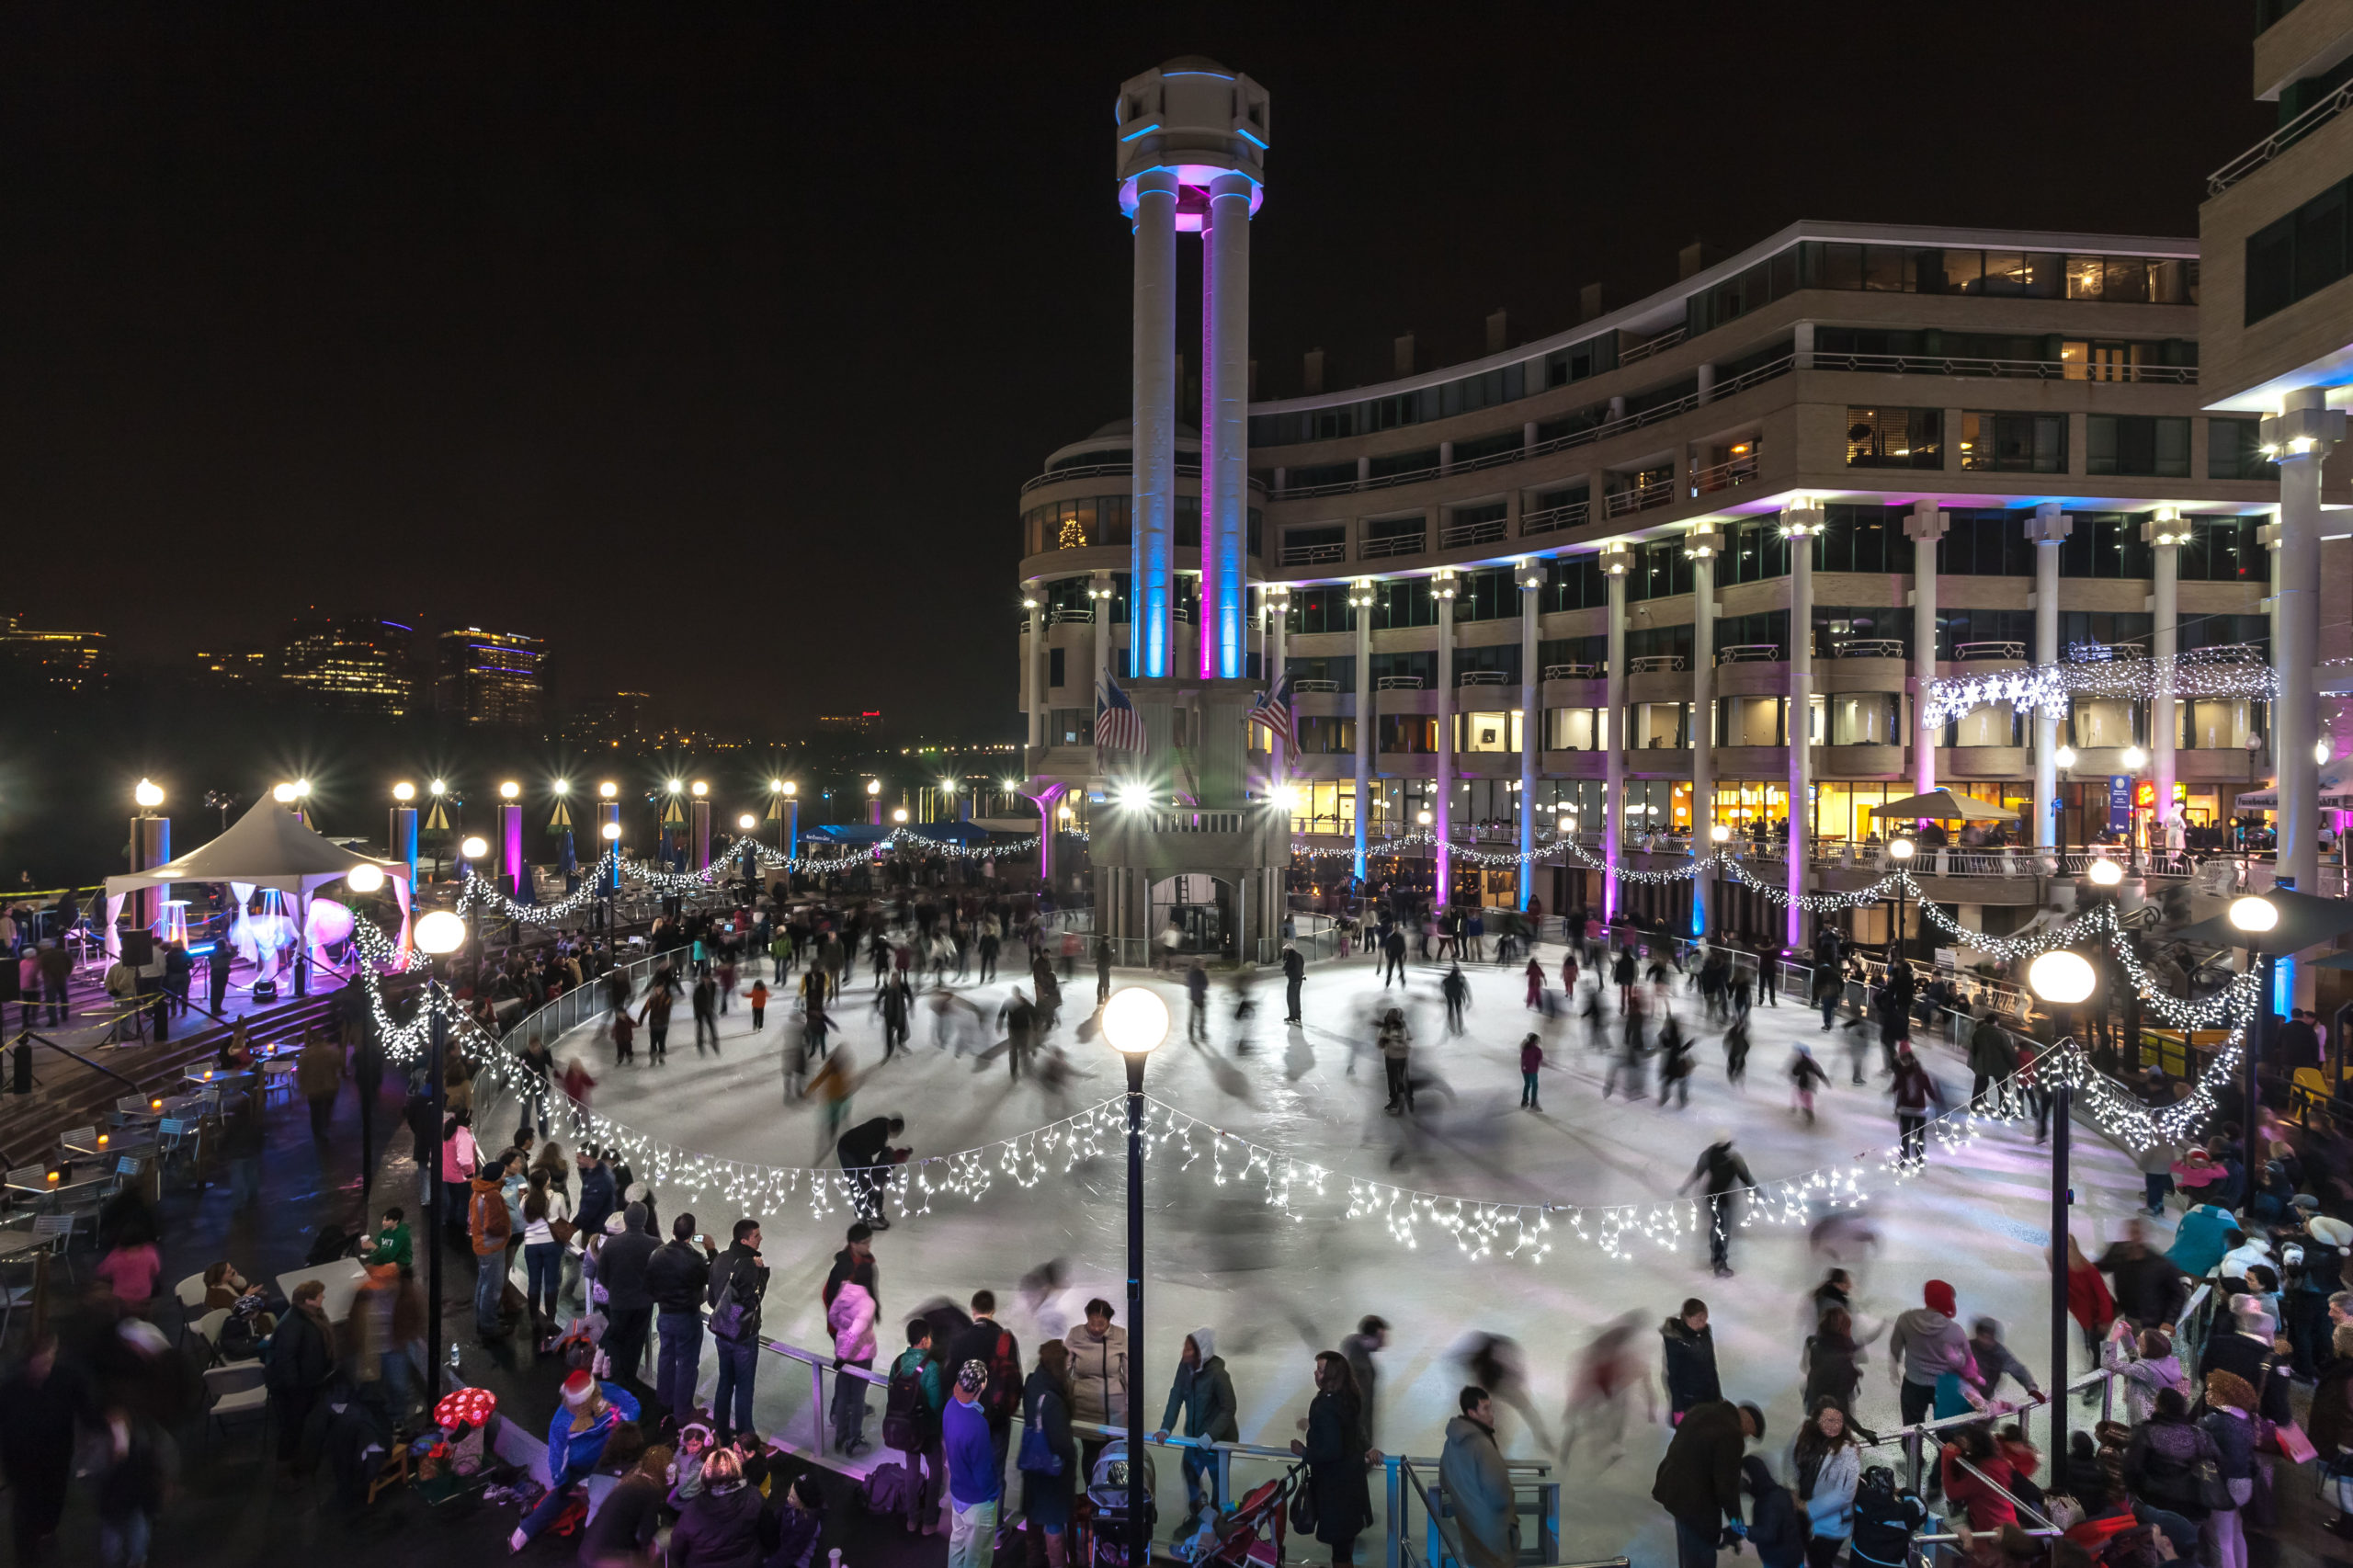 The Washington Harbour ice rink at night